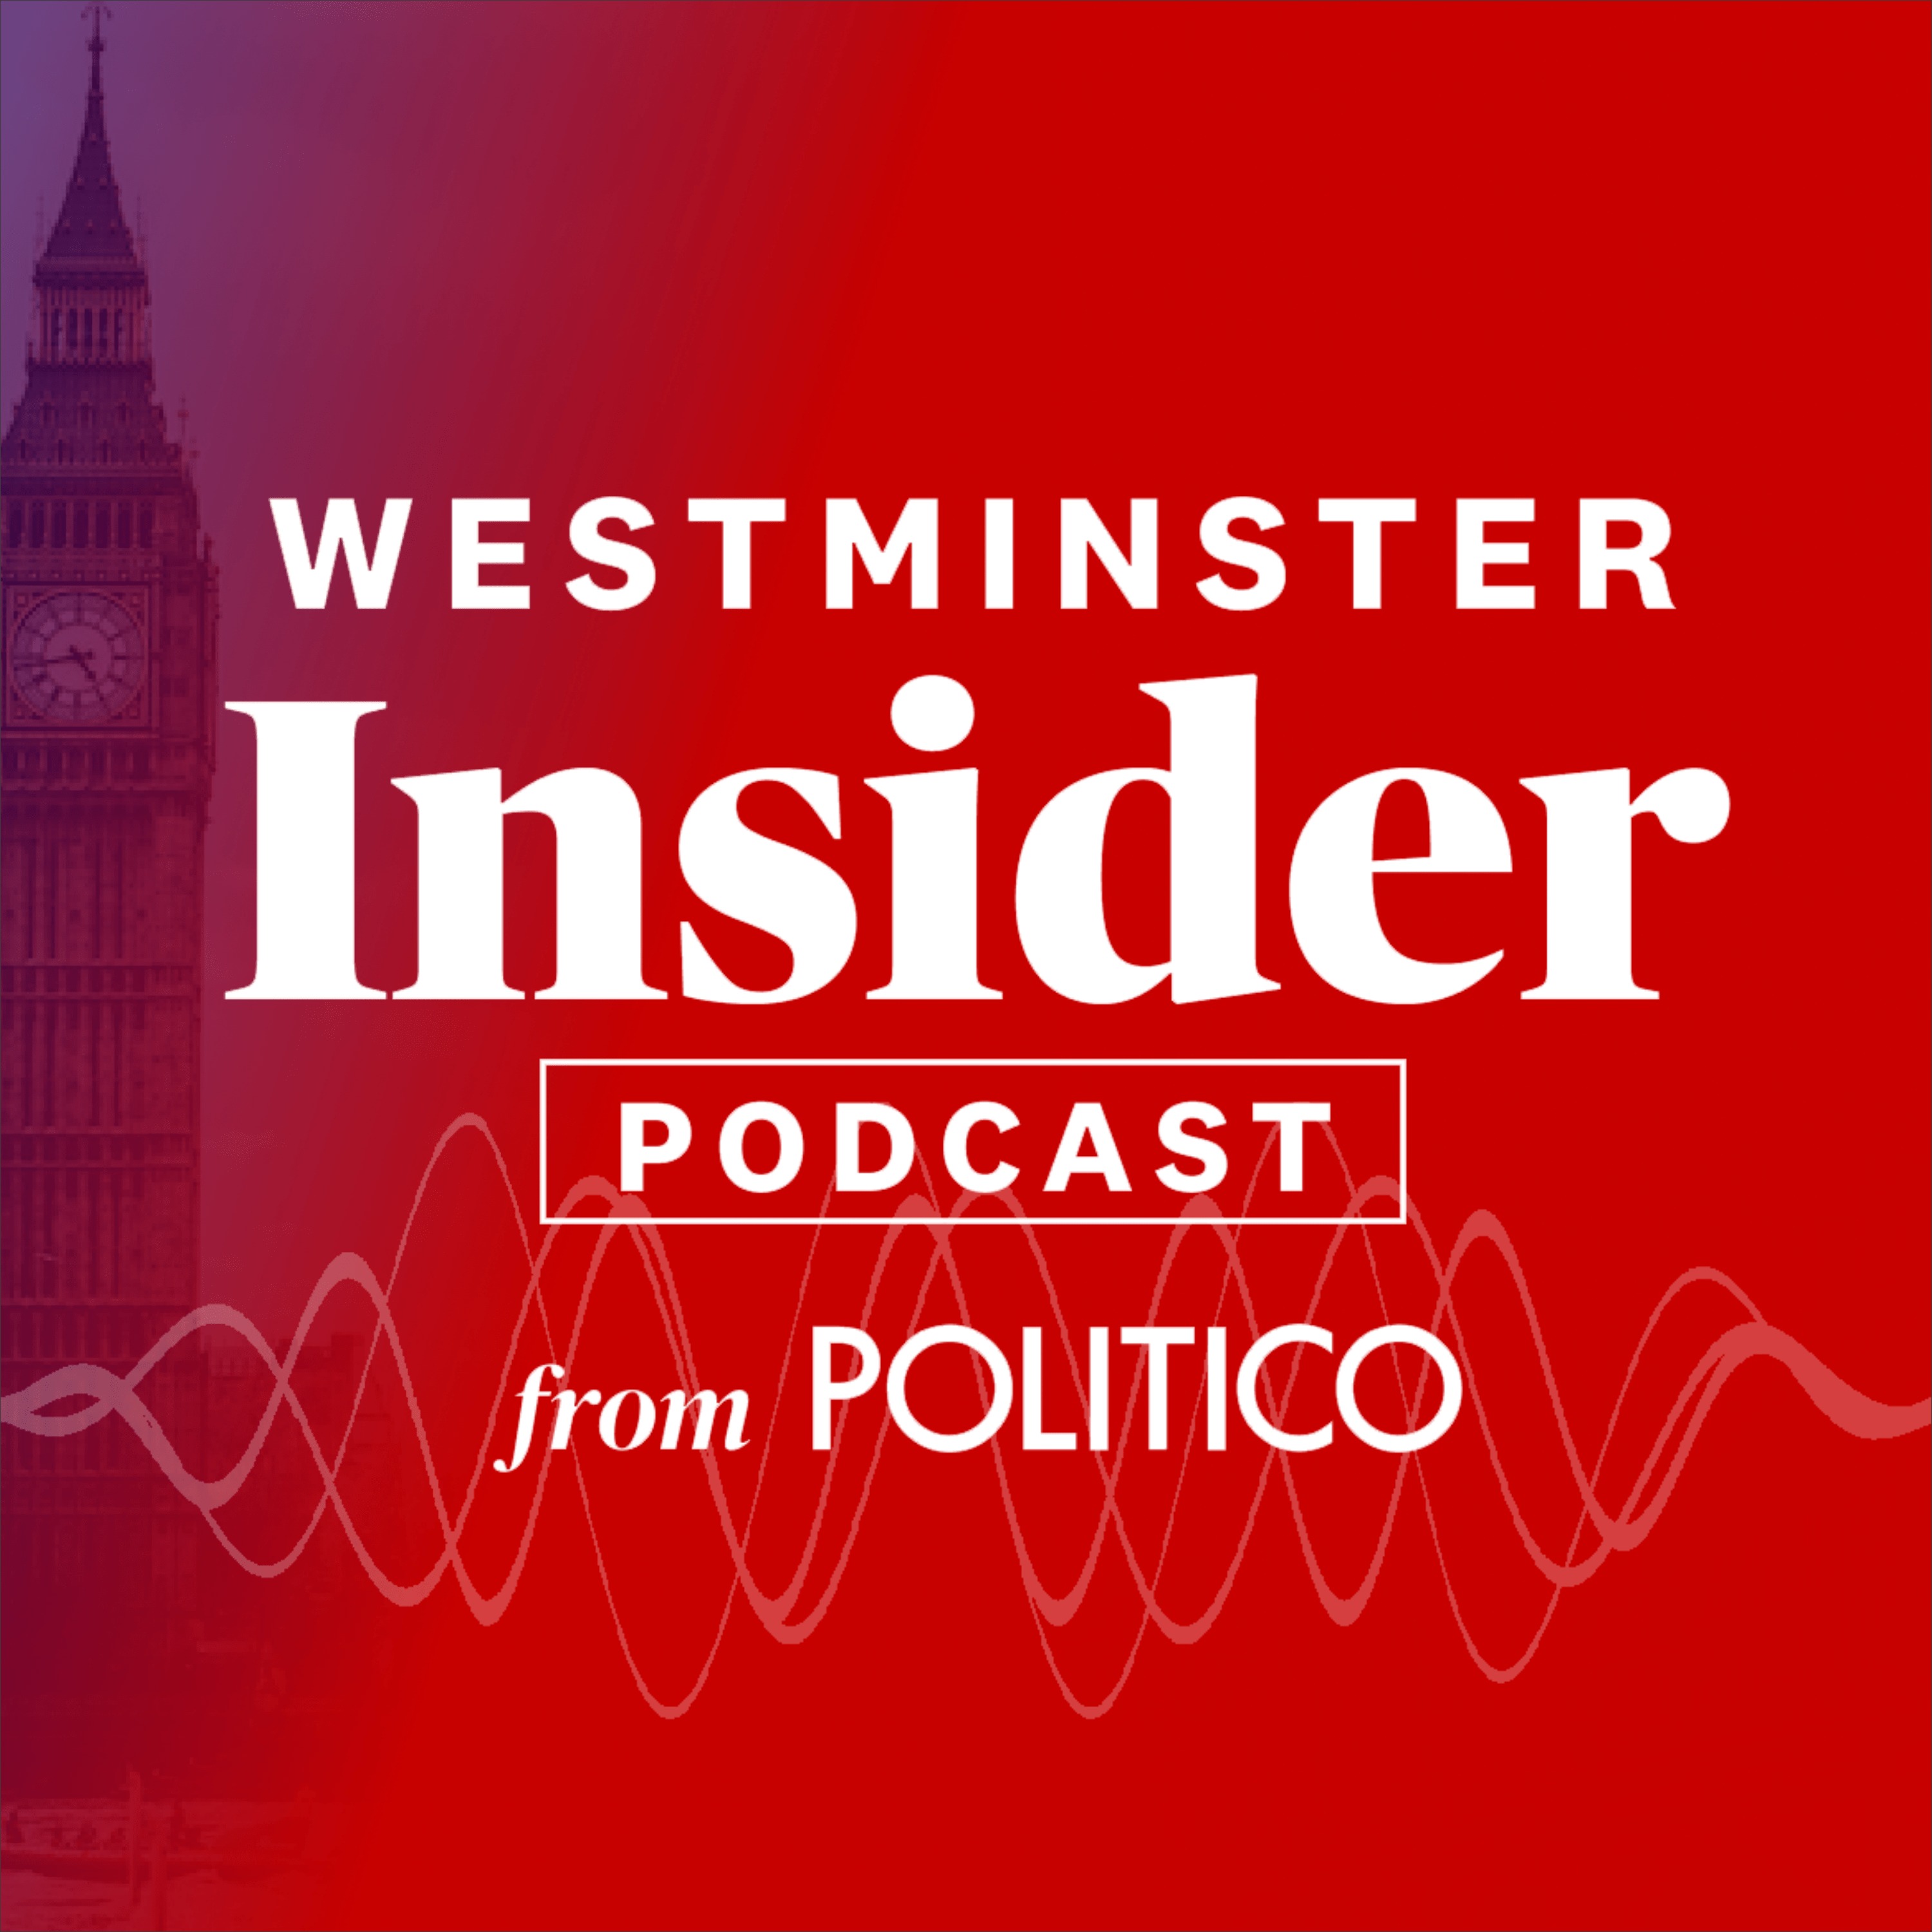 Is Westminster ready for the return of Donald Trump?